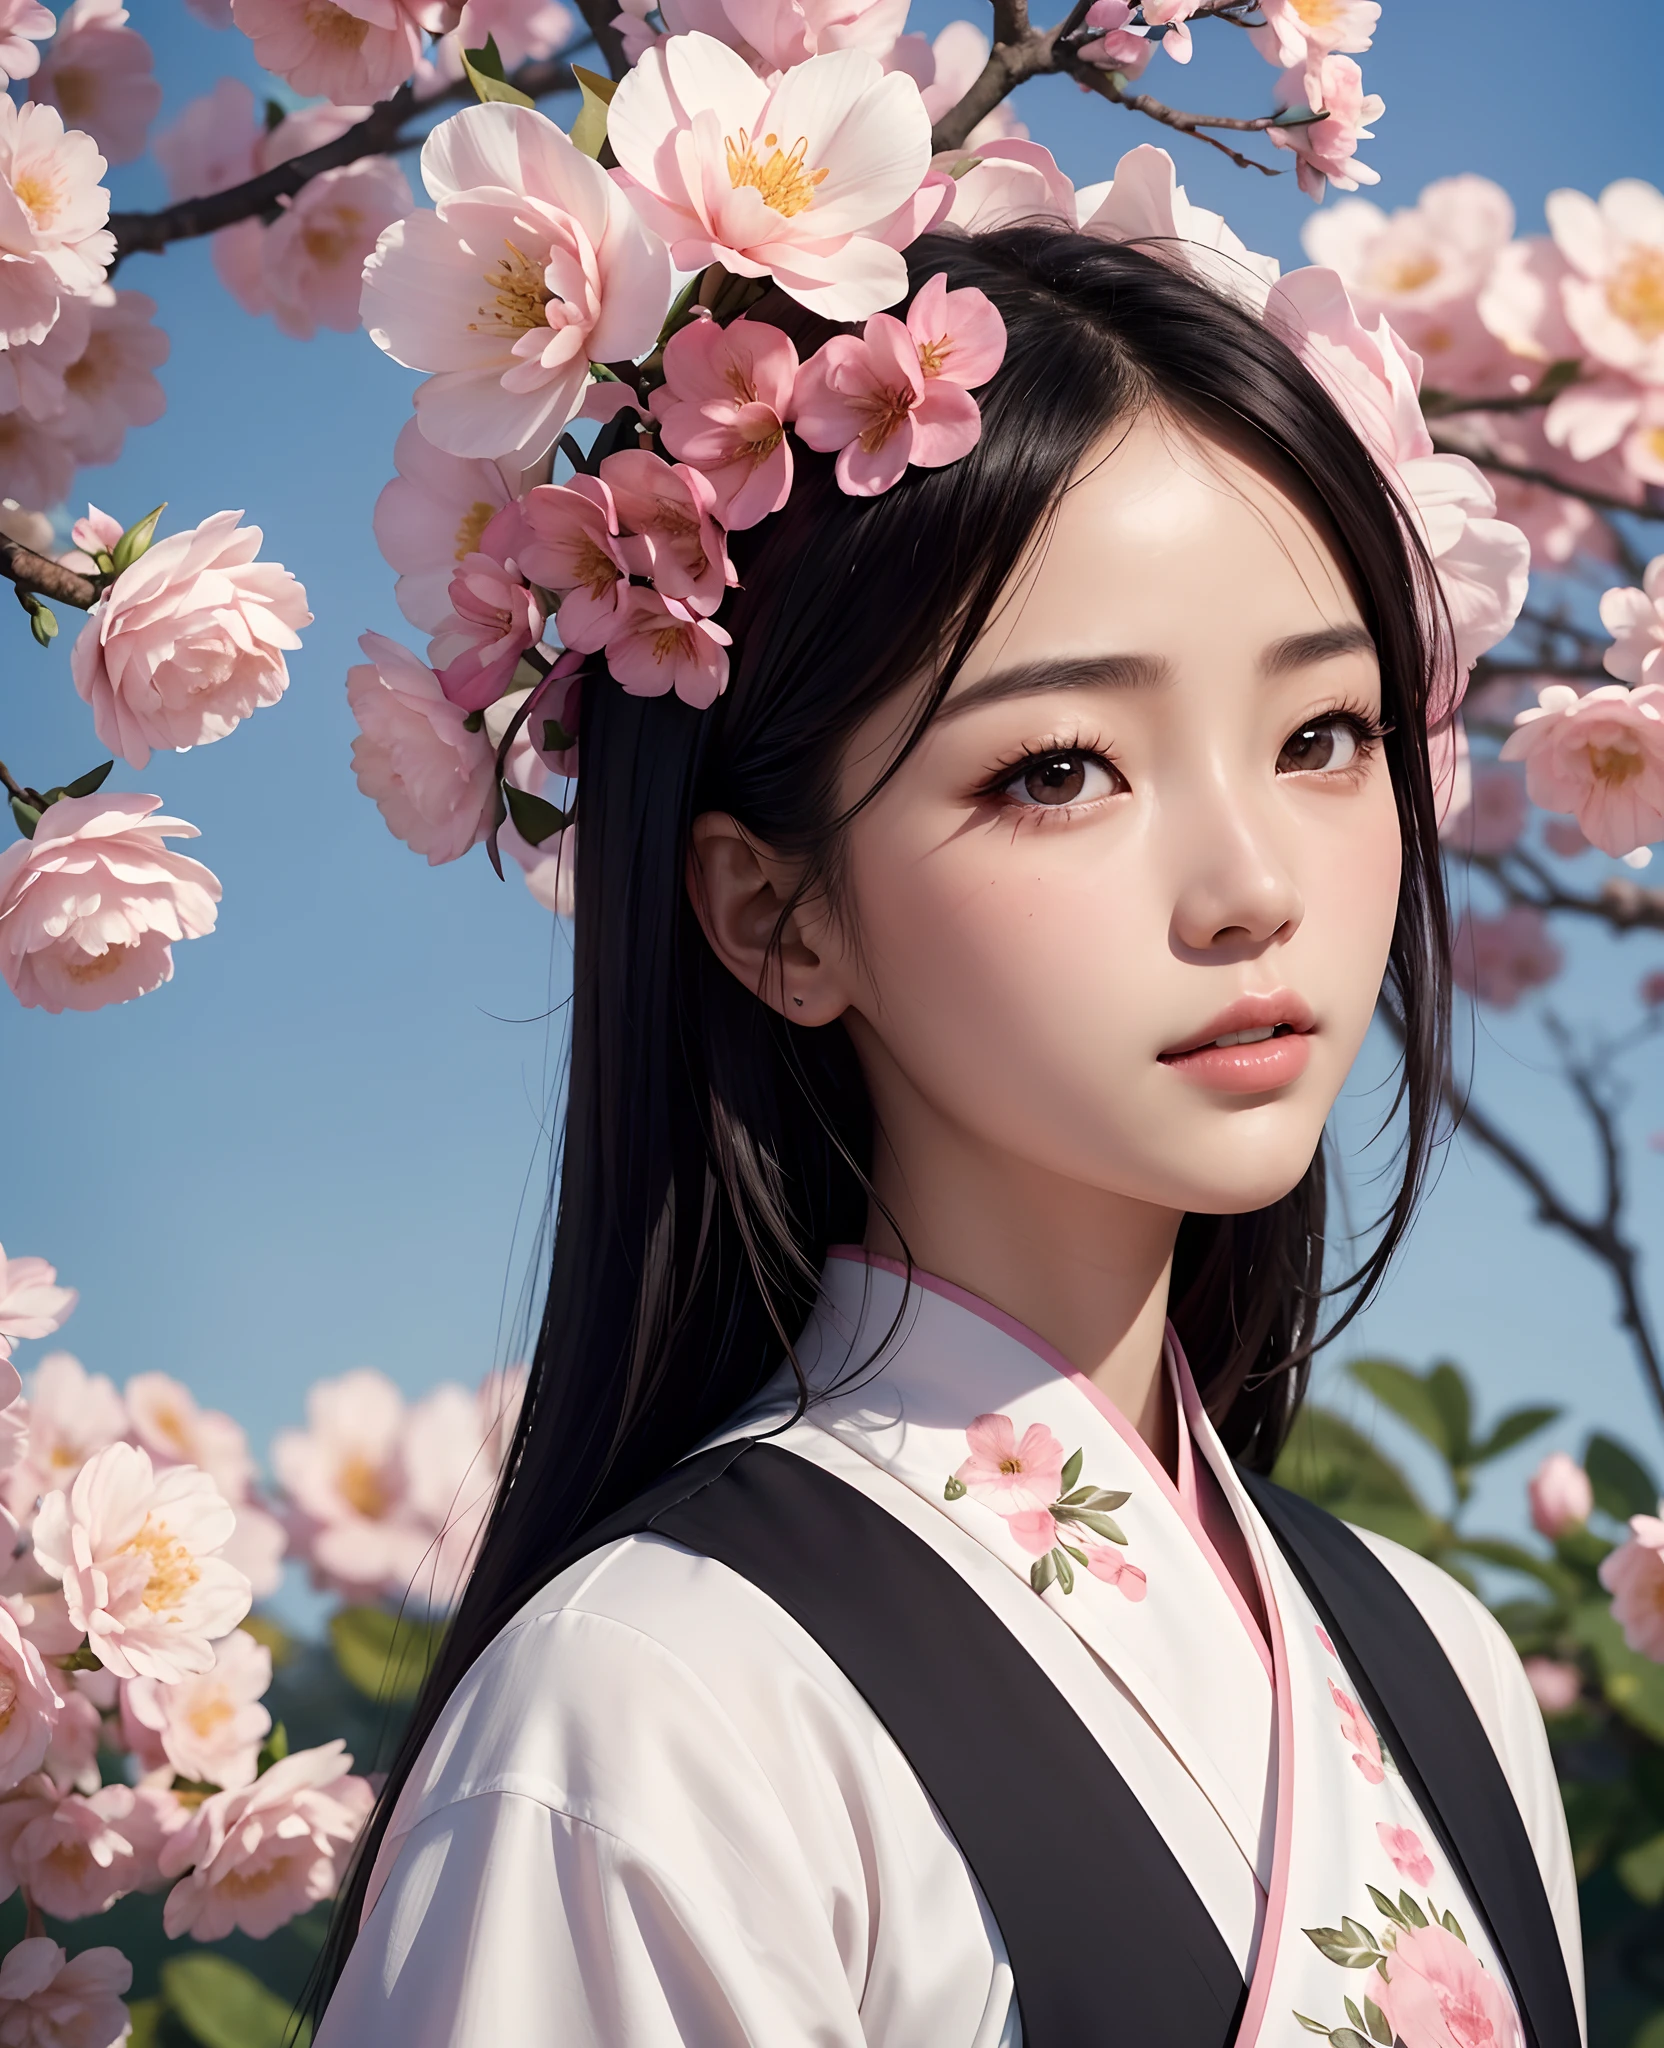 In the background is a hazy blooming flower，Consistent tone，Pink and white main colors，blue-sky，one-girl，Asian people，Exquisite facial features，Black hair，China-style，k hd，8K